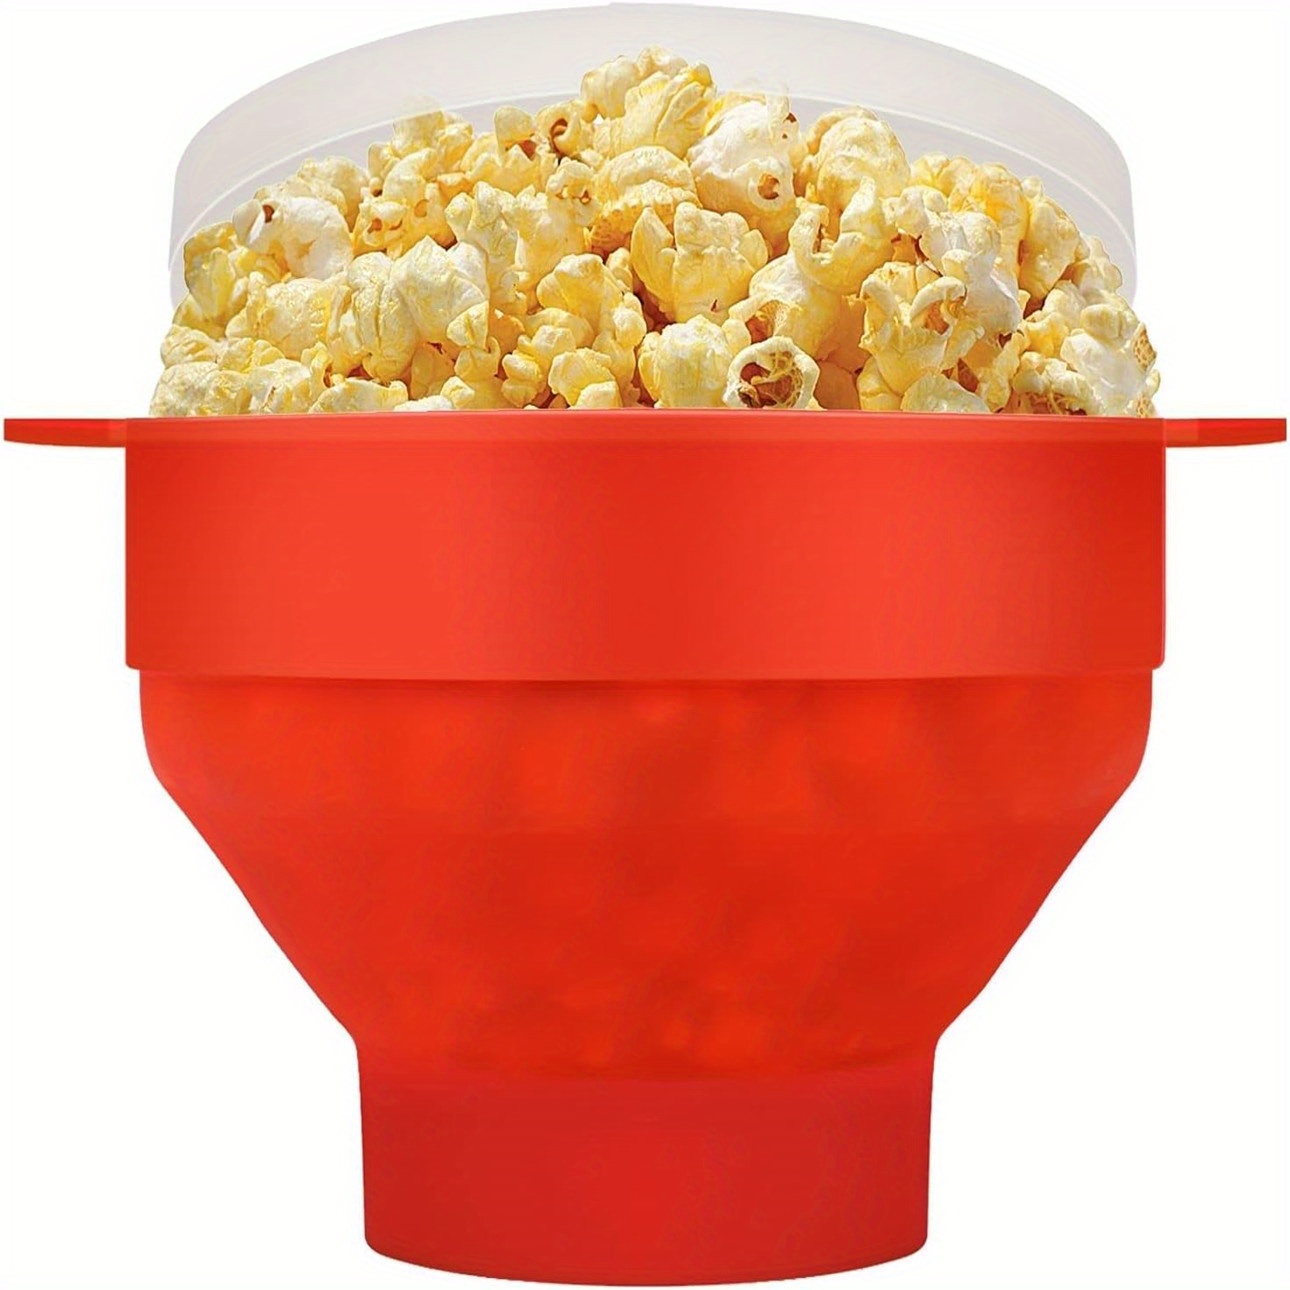 Silicone Microwave Popcorn Maker Buy Now